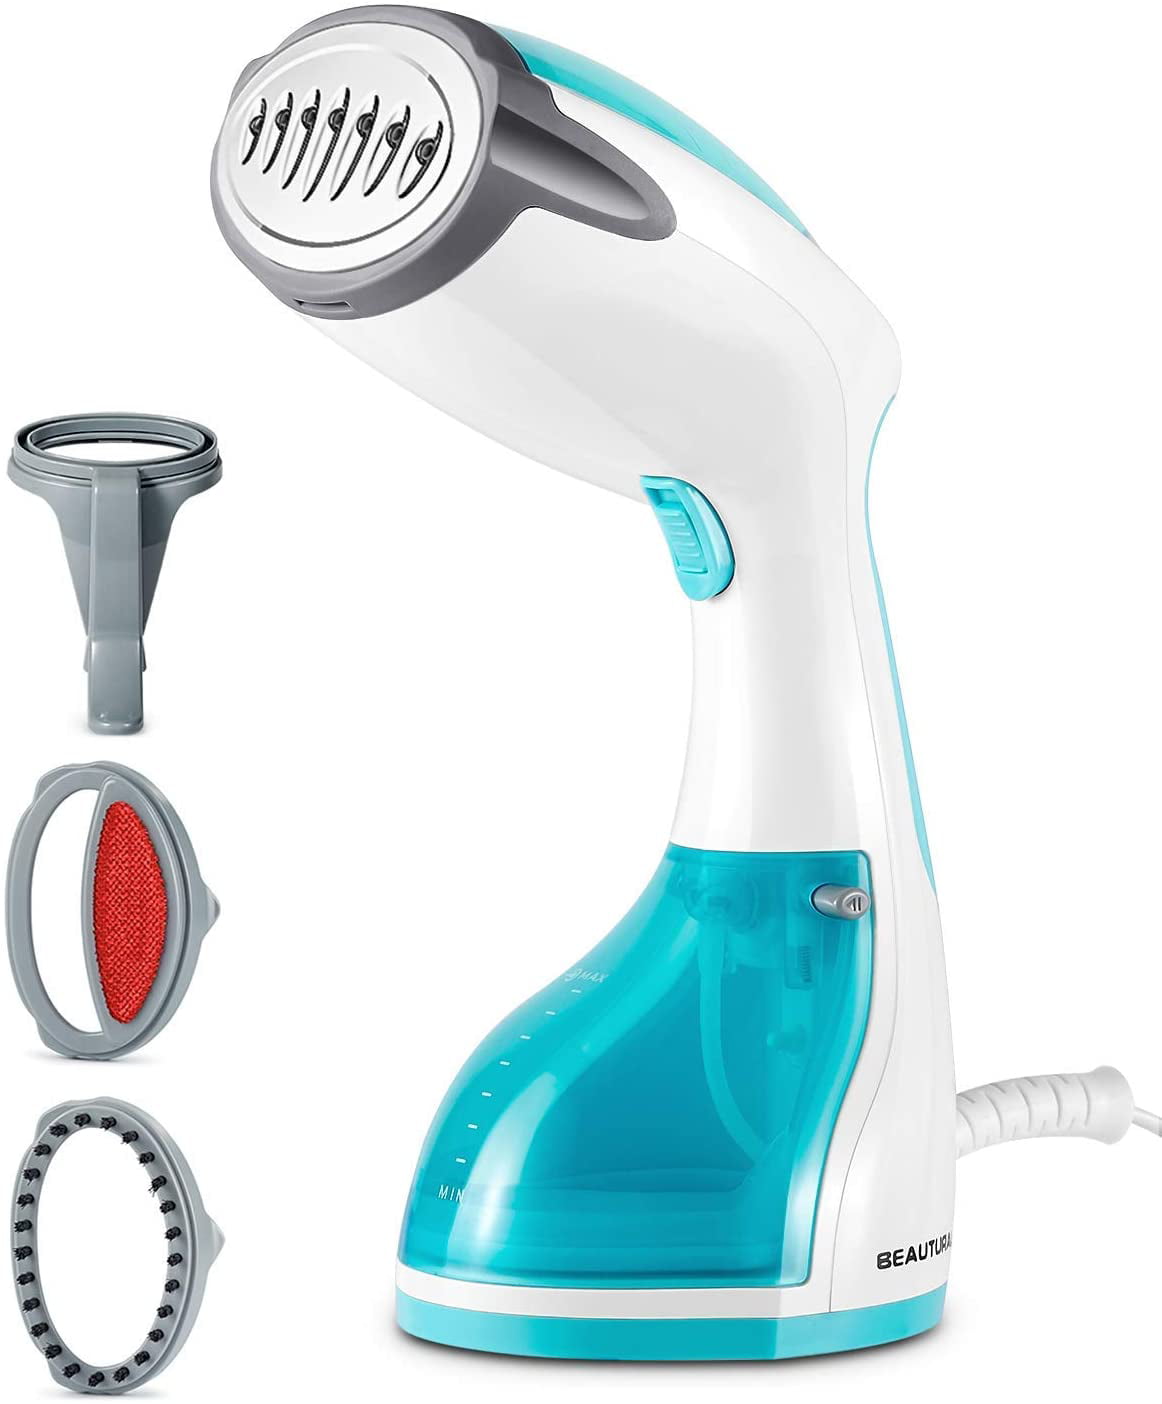 30S Fast Clothes Steamer Handheld Portable Garment Steamer for Home and Travel